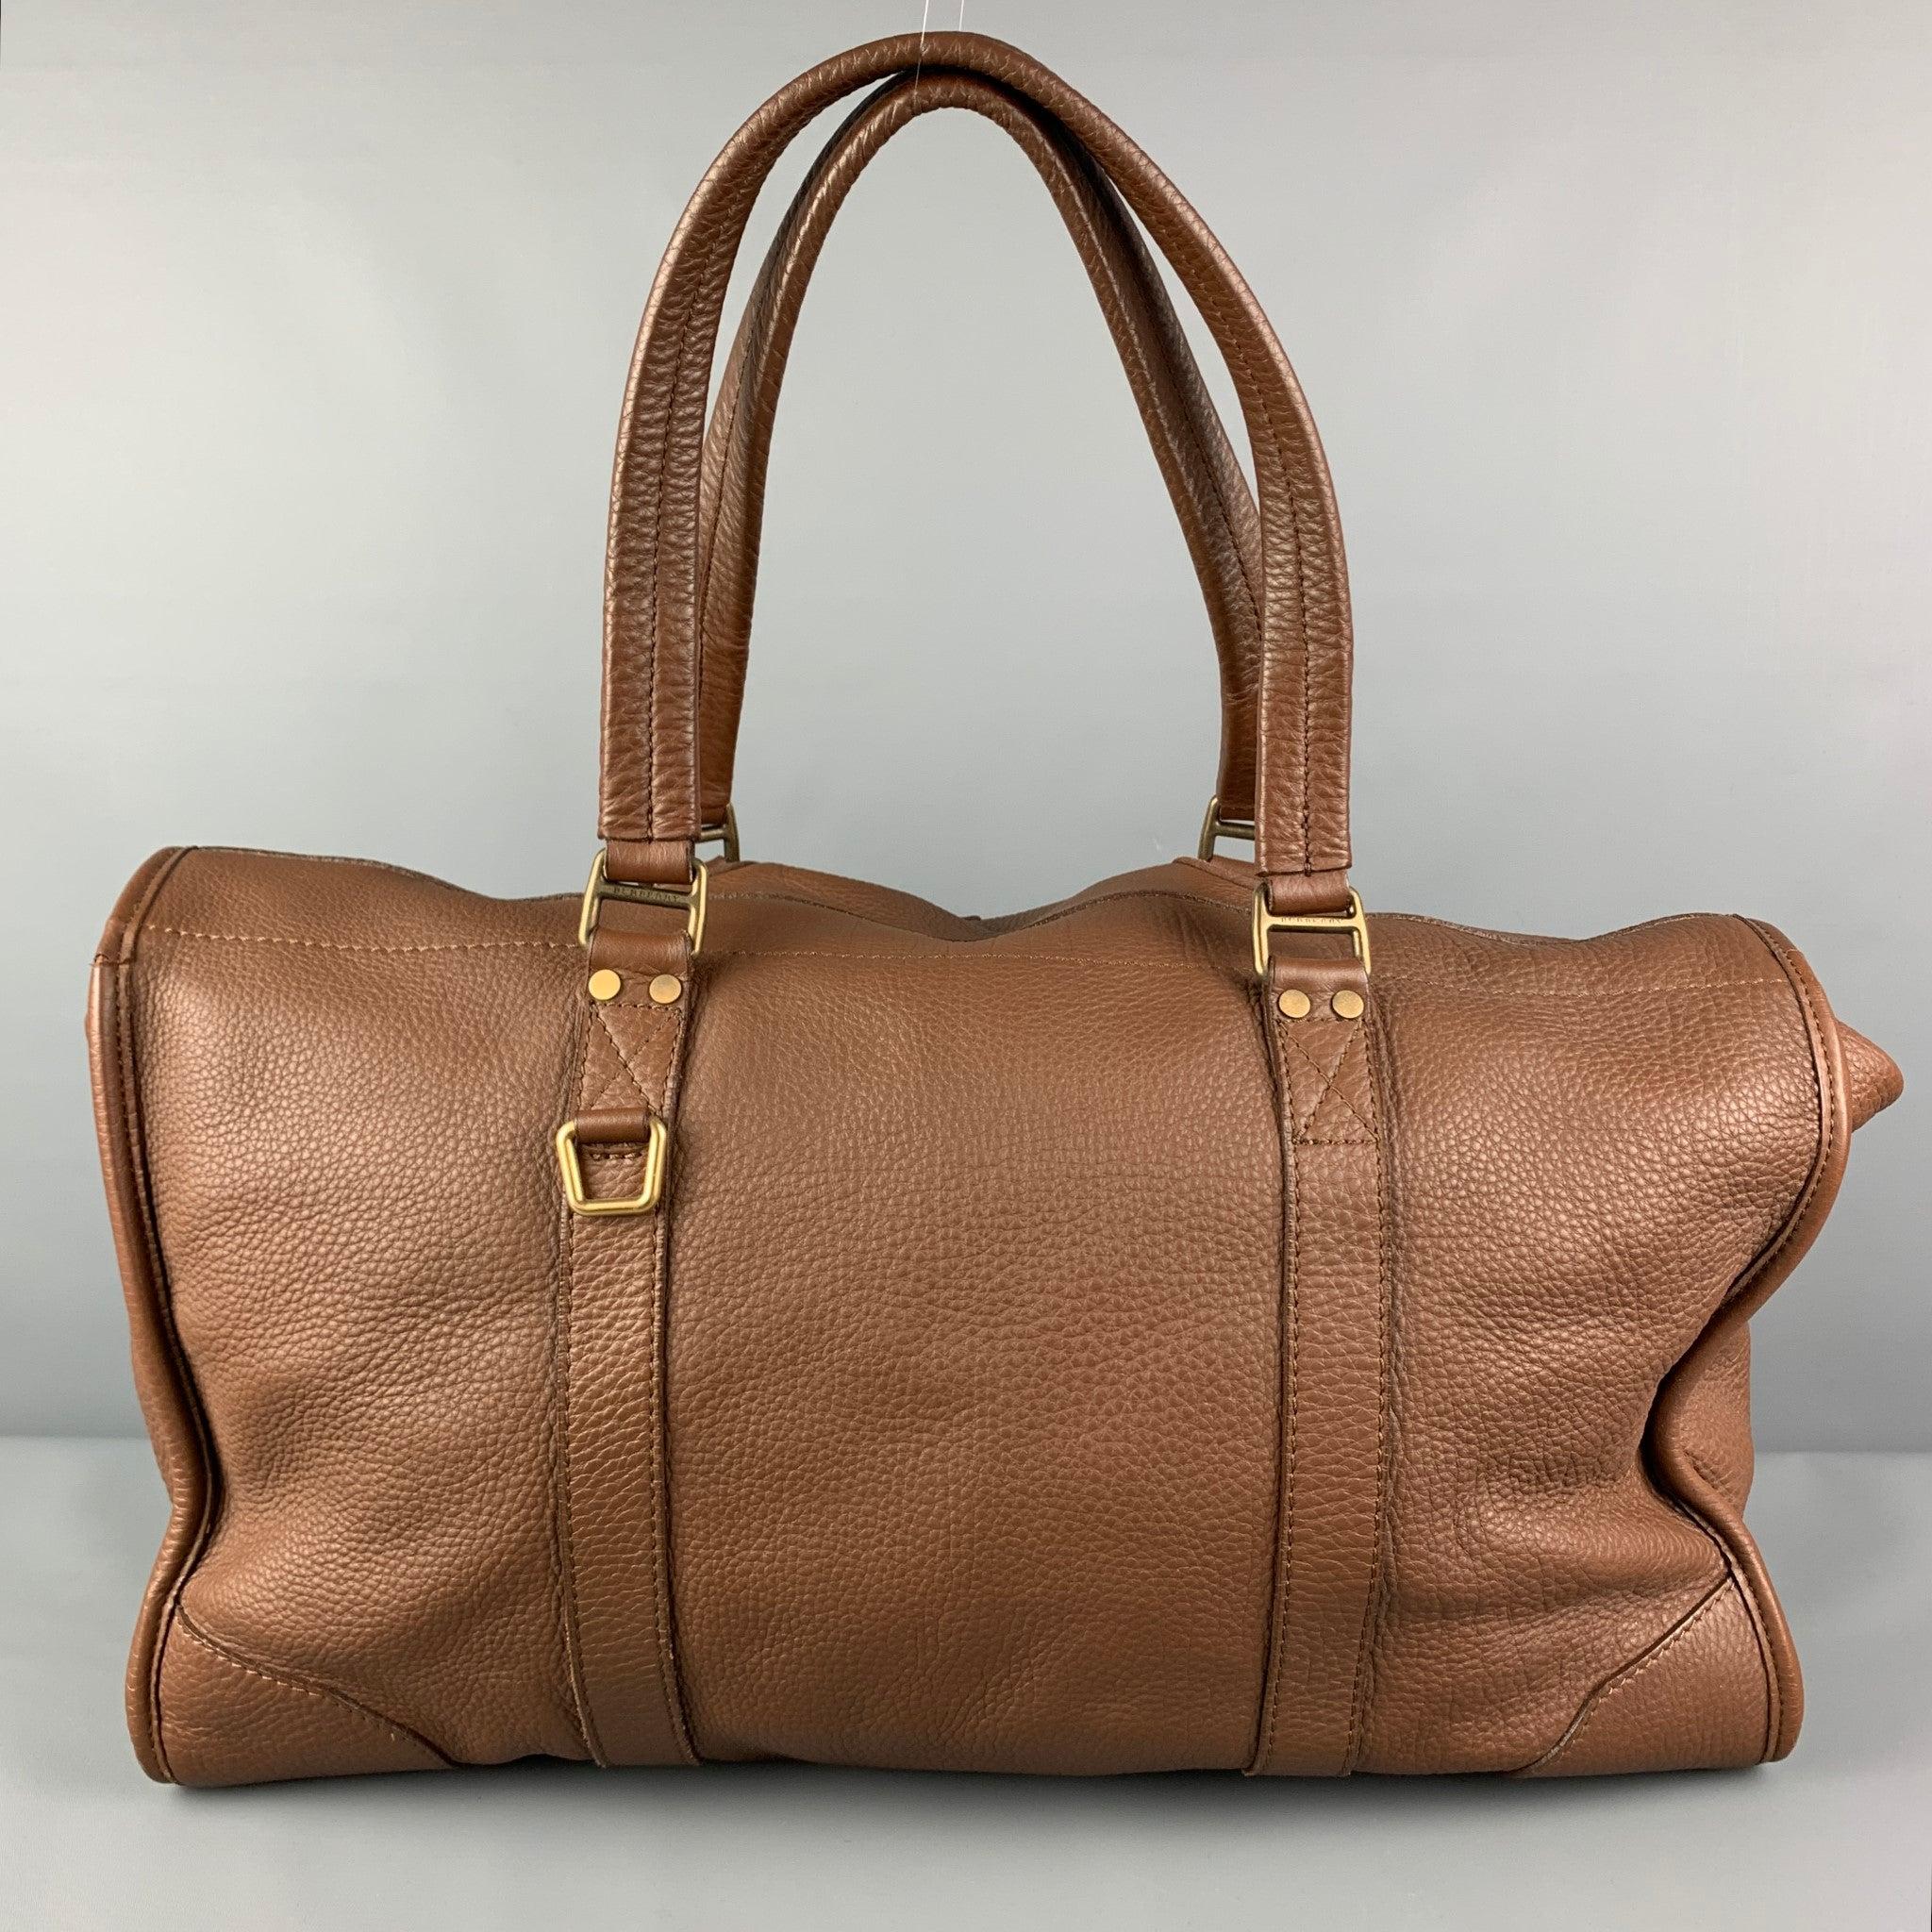 BURBERRY by Christopher Bailey Brown Textured Pebble Grain Leather Messenger Bag In Good Condition For Sale In San Francisco, CA